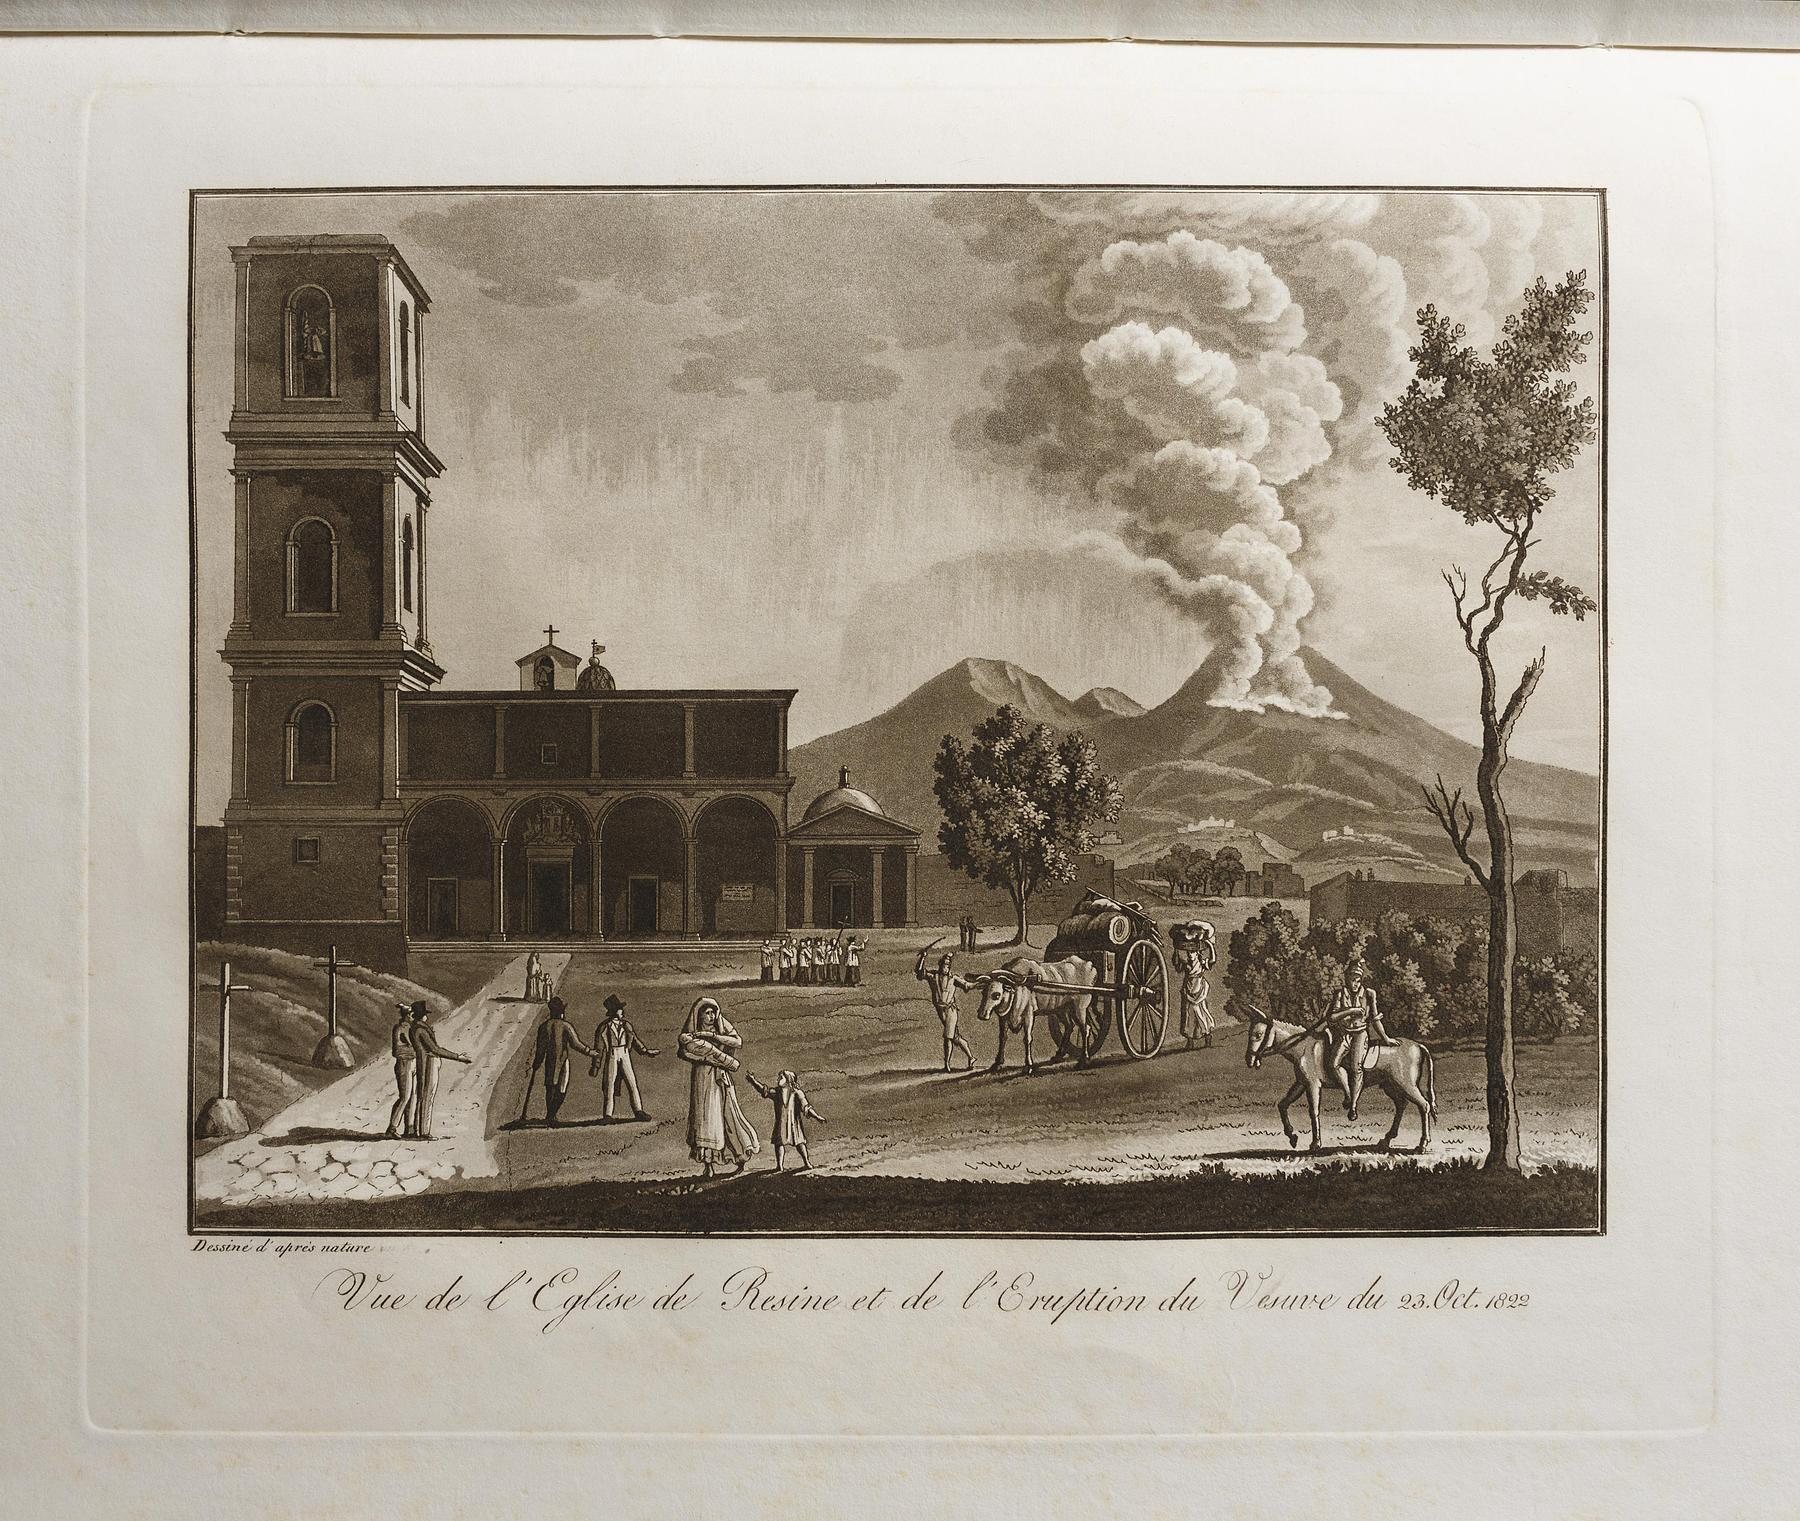 View of the Church of Resina and the Eruption of Vesuvius from 23rd Oct. 1822, E550,54